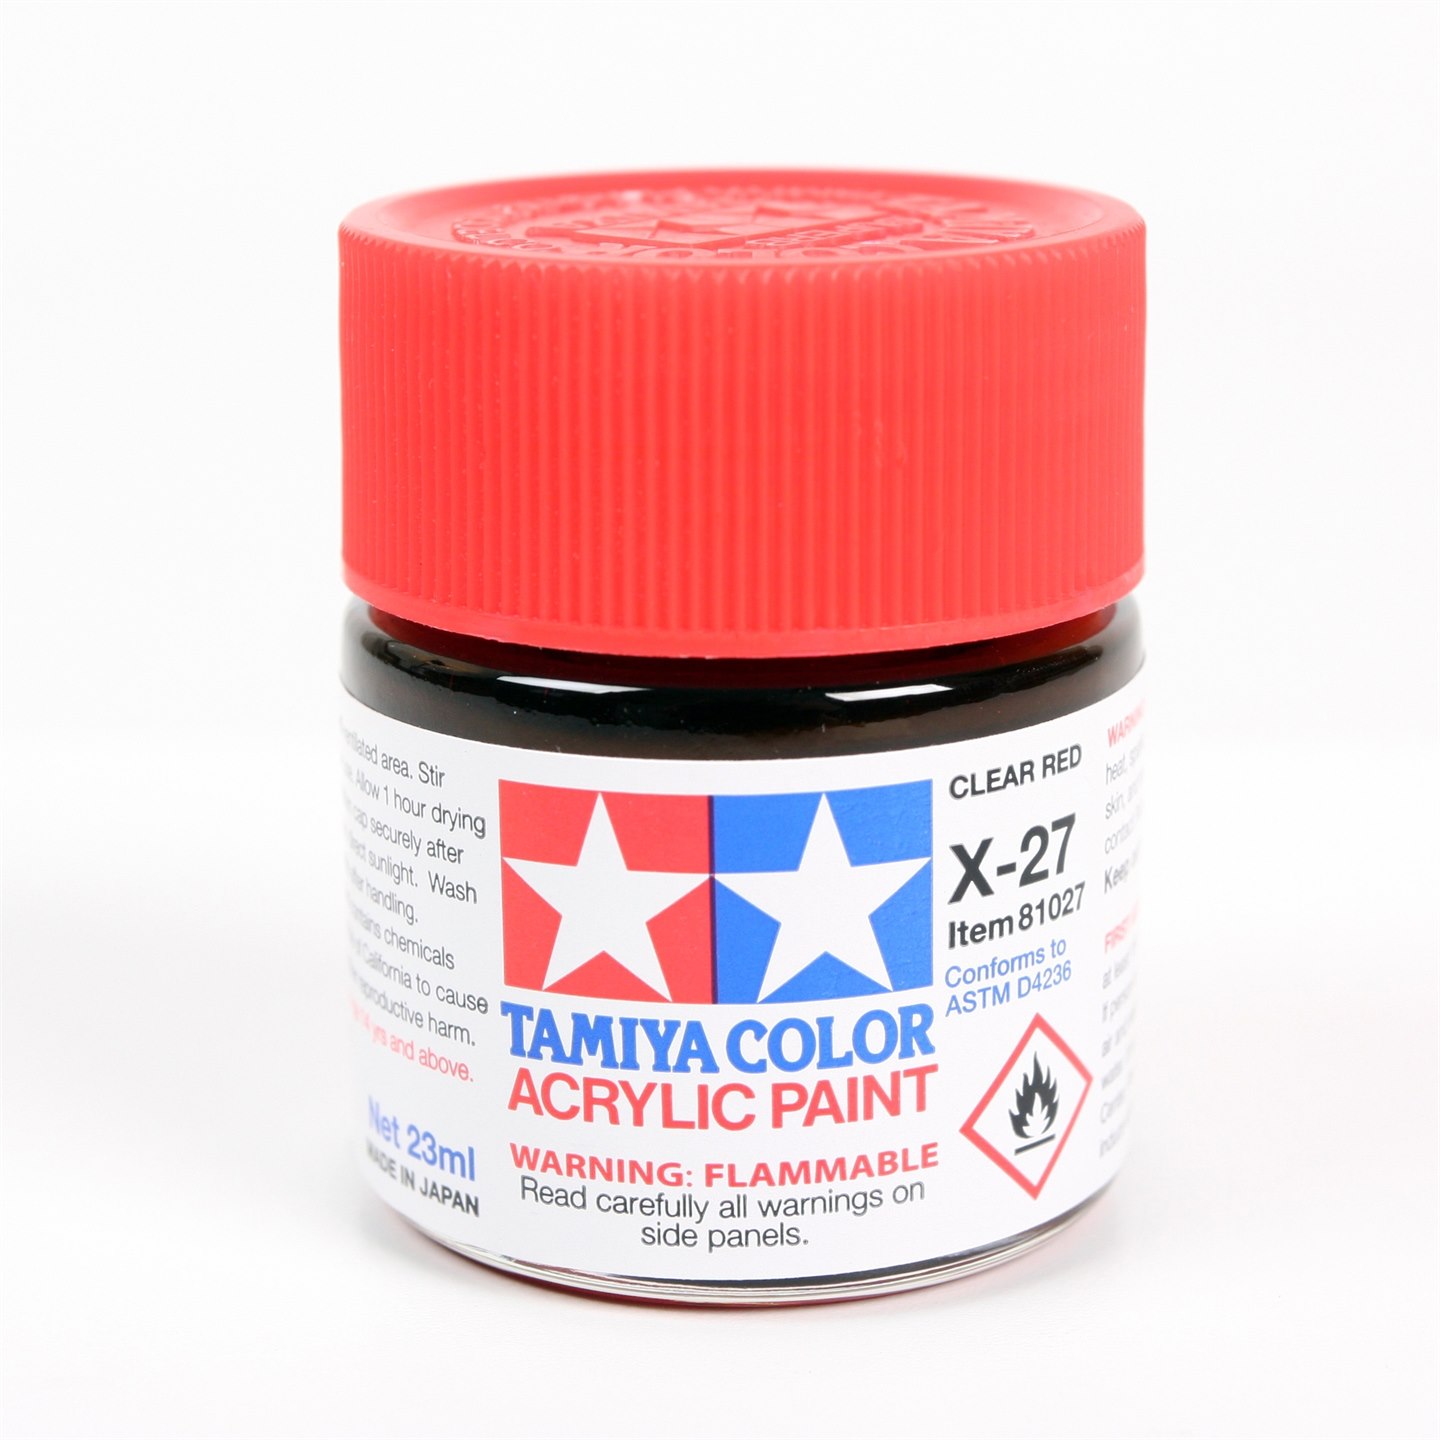 Tamiya Color Acrylic Paint X-27 (Clear Red) (23ml)